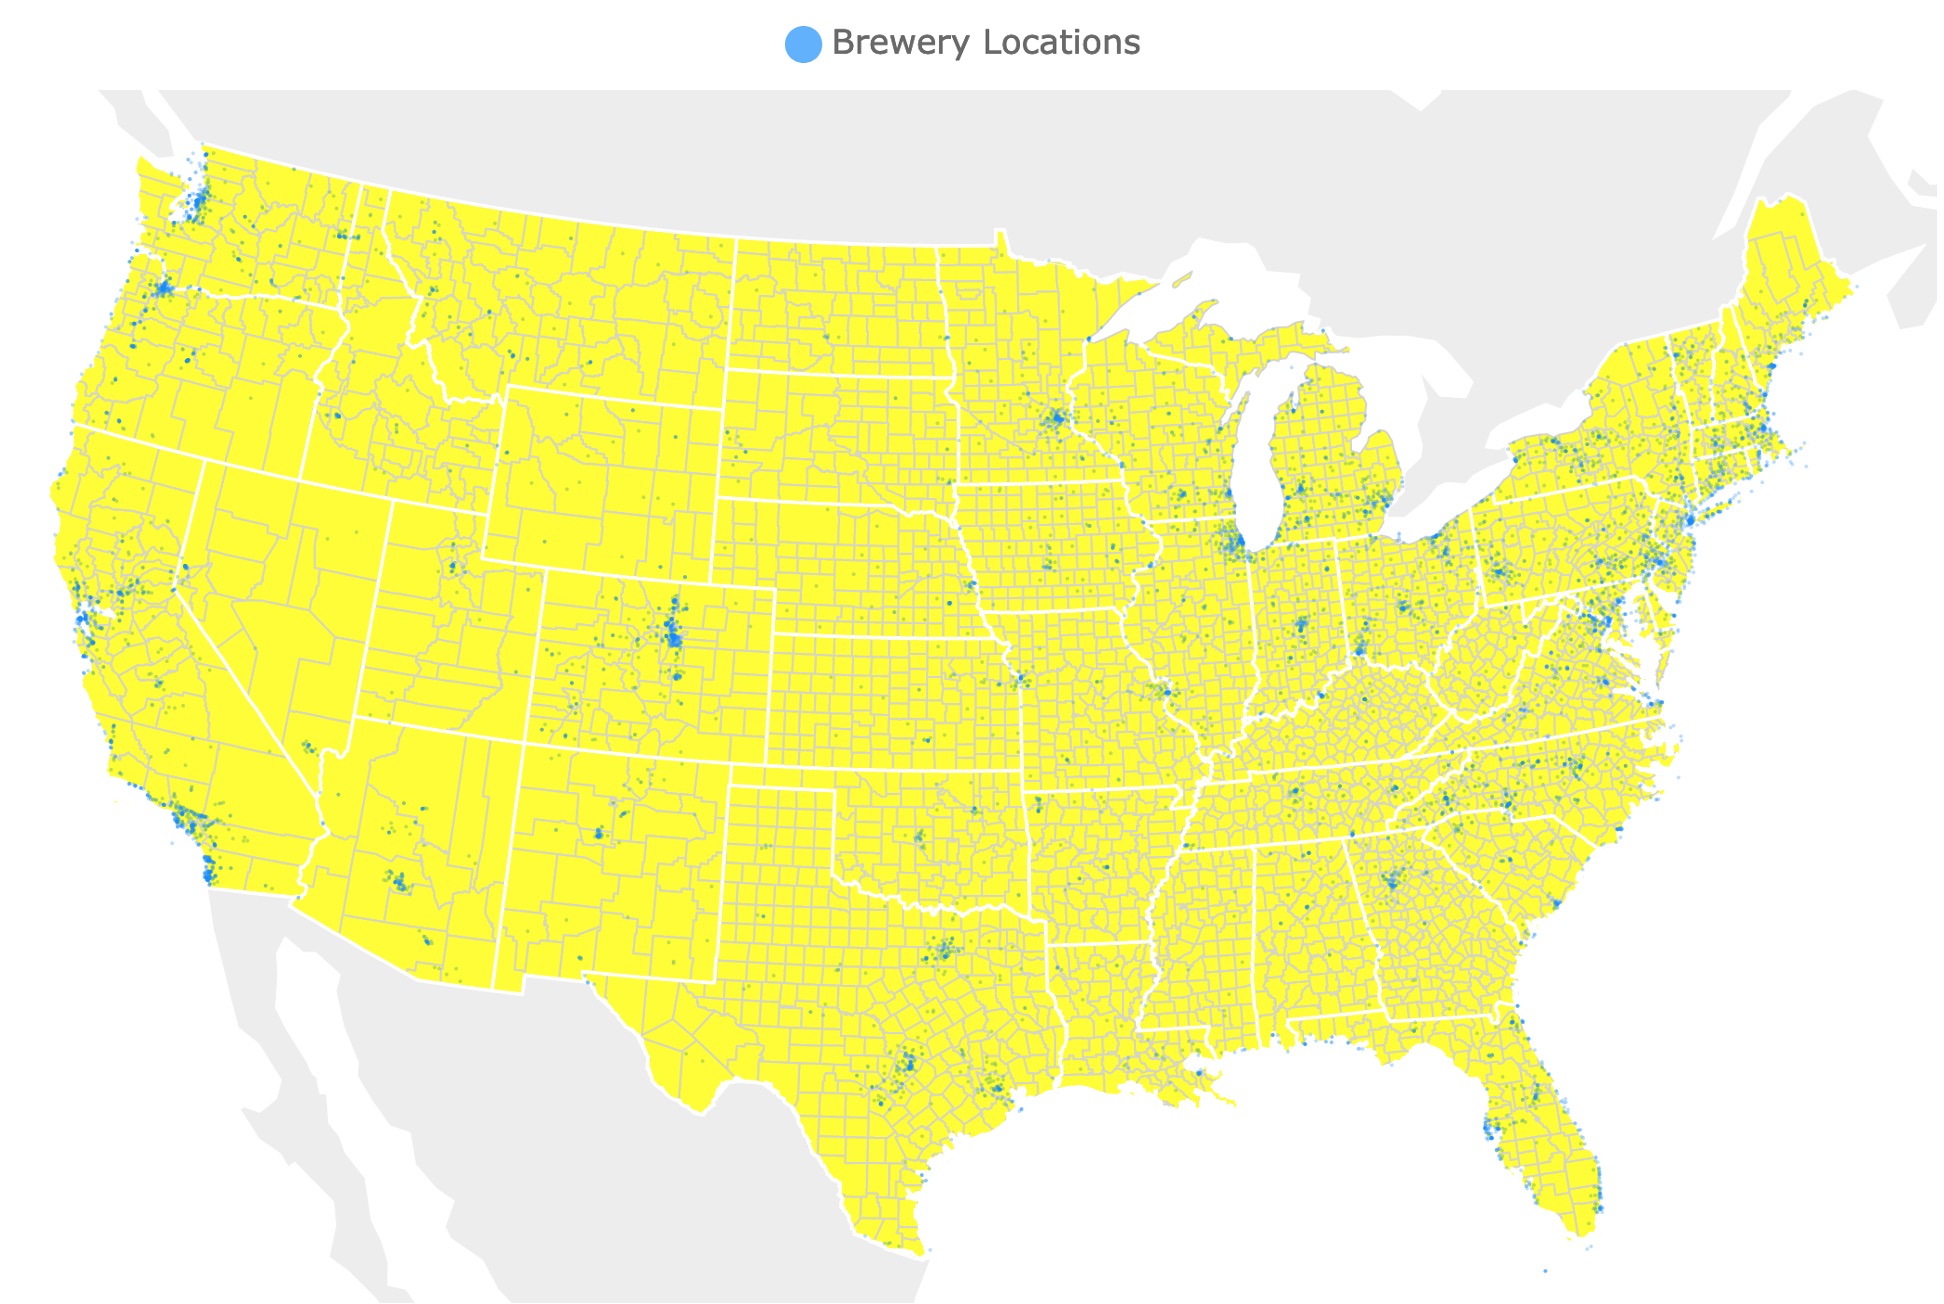 brewery locations in the US